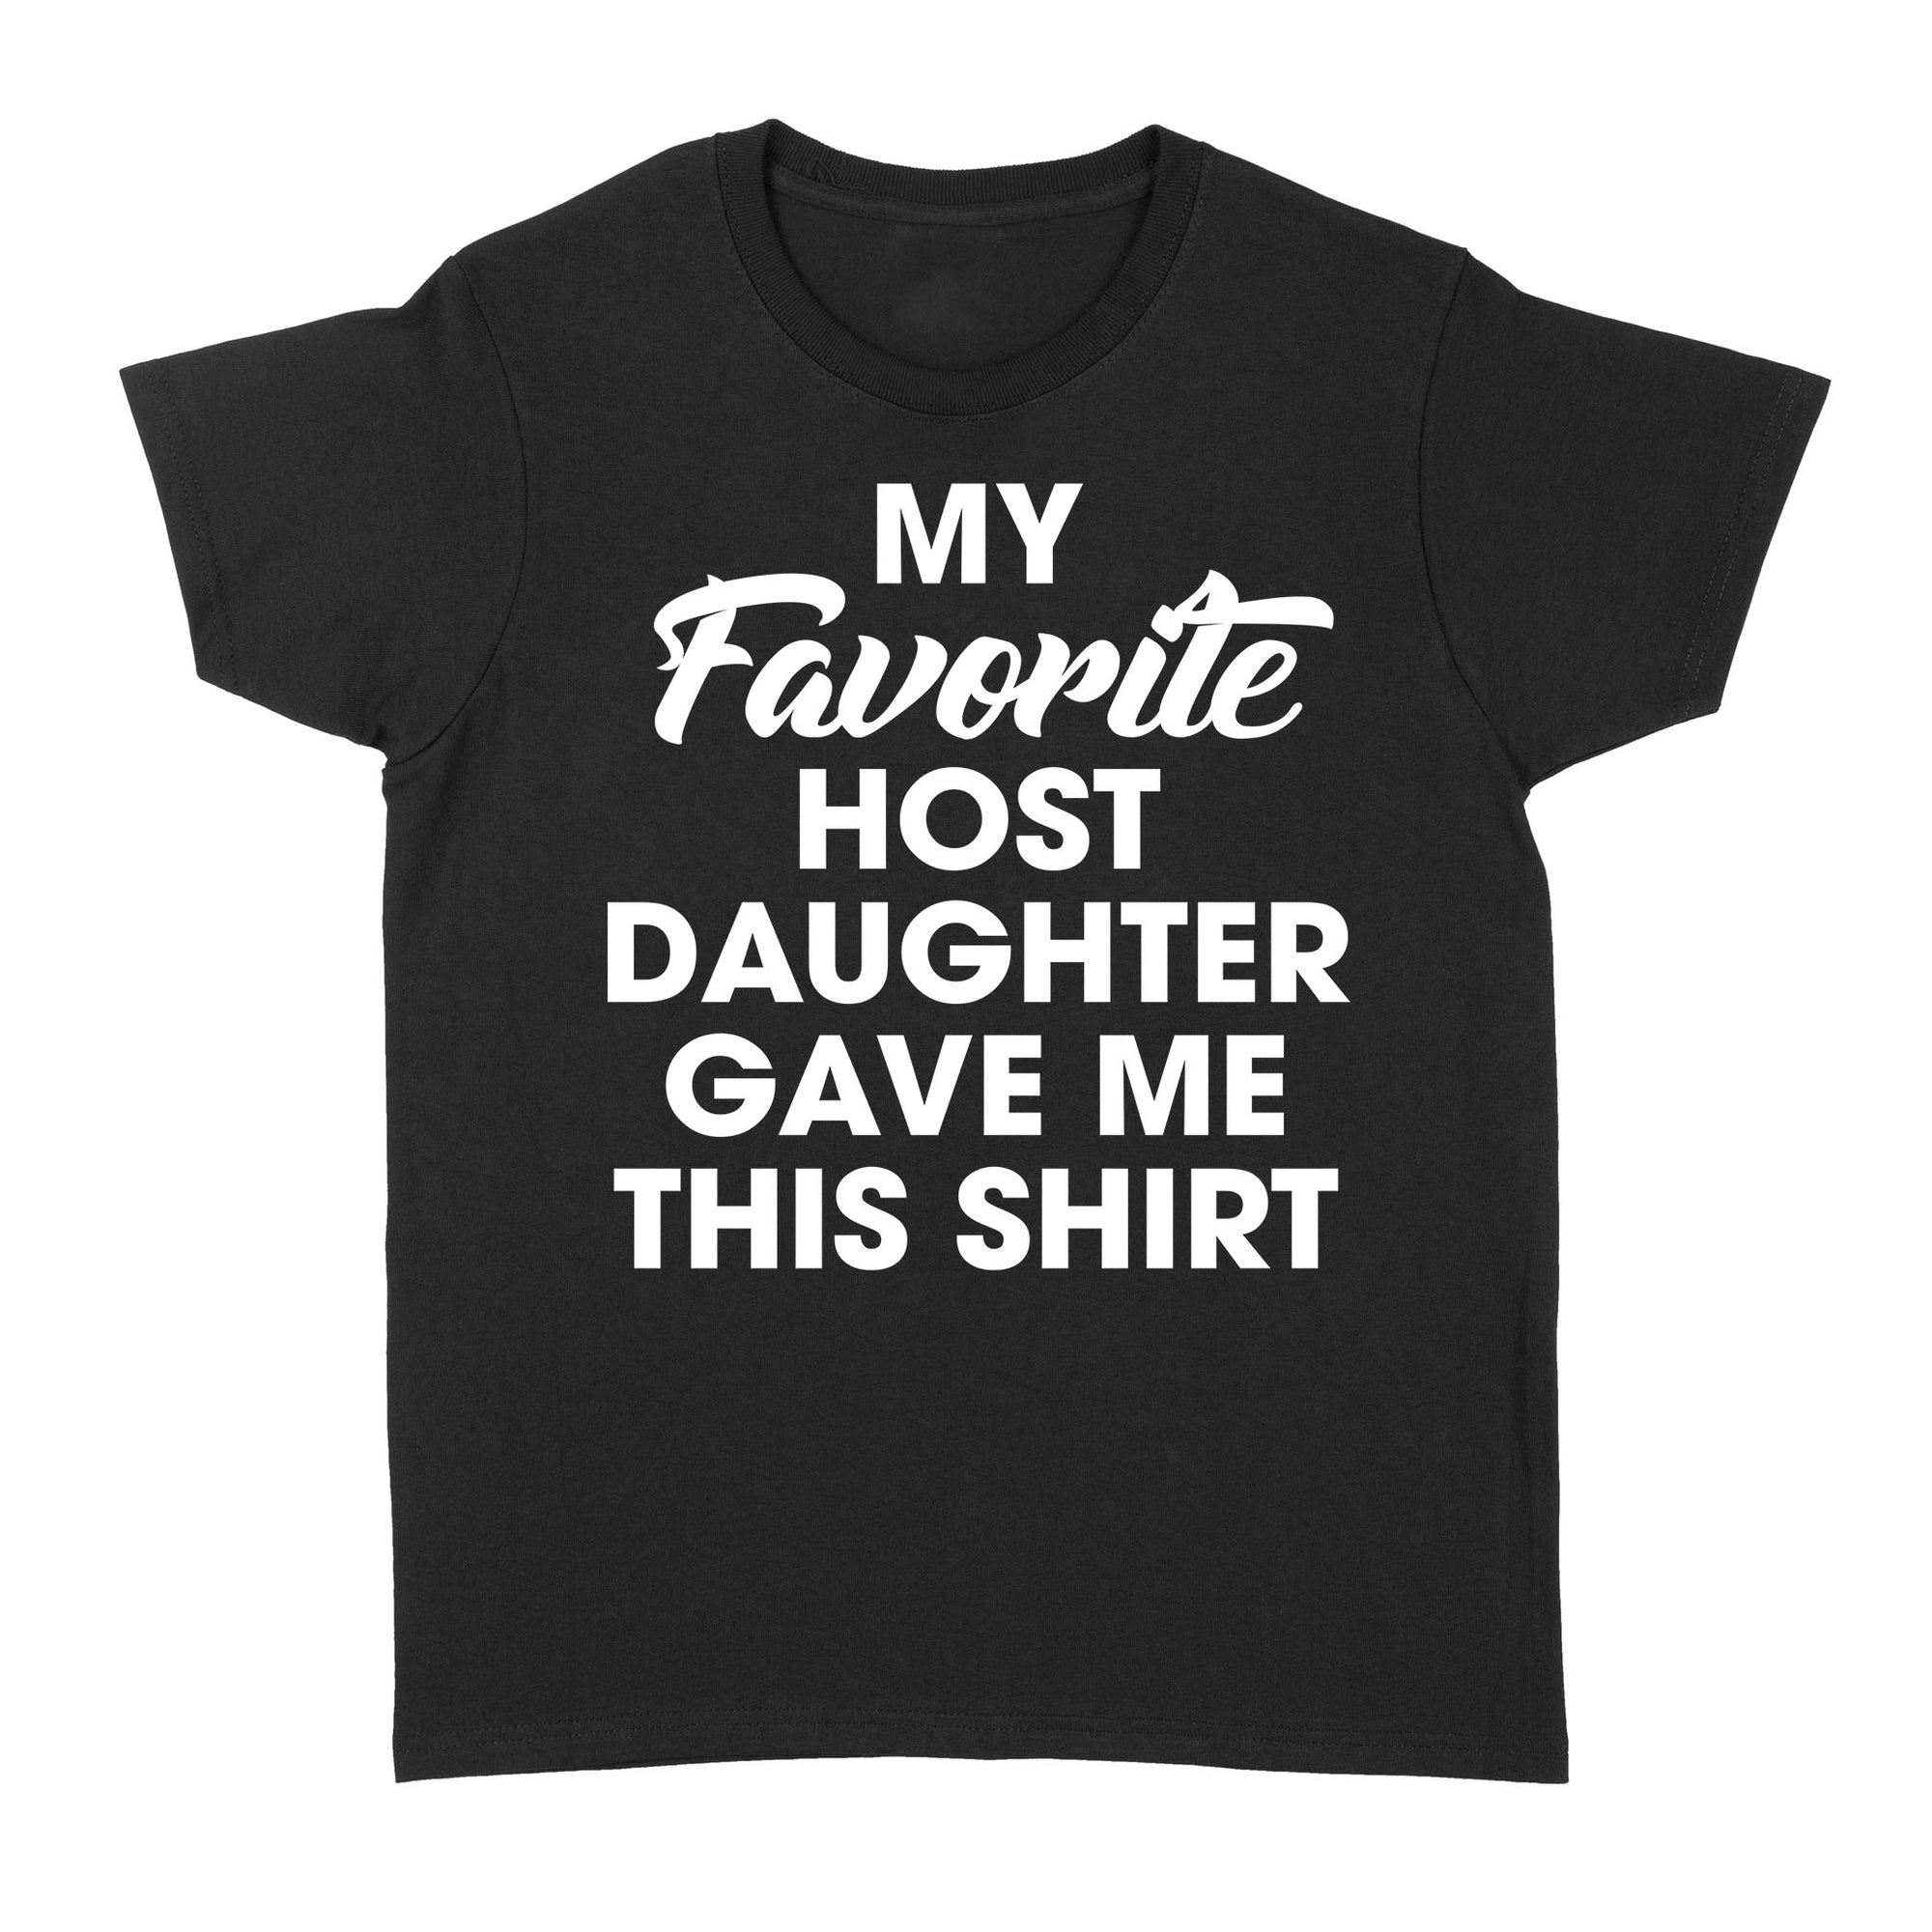 My Favorite Host Daughter Gave Me This Shirt Funny Gift Ideas For Girls Fathers Day Mothers Day Mom Dad - Standard Women's T-shirt